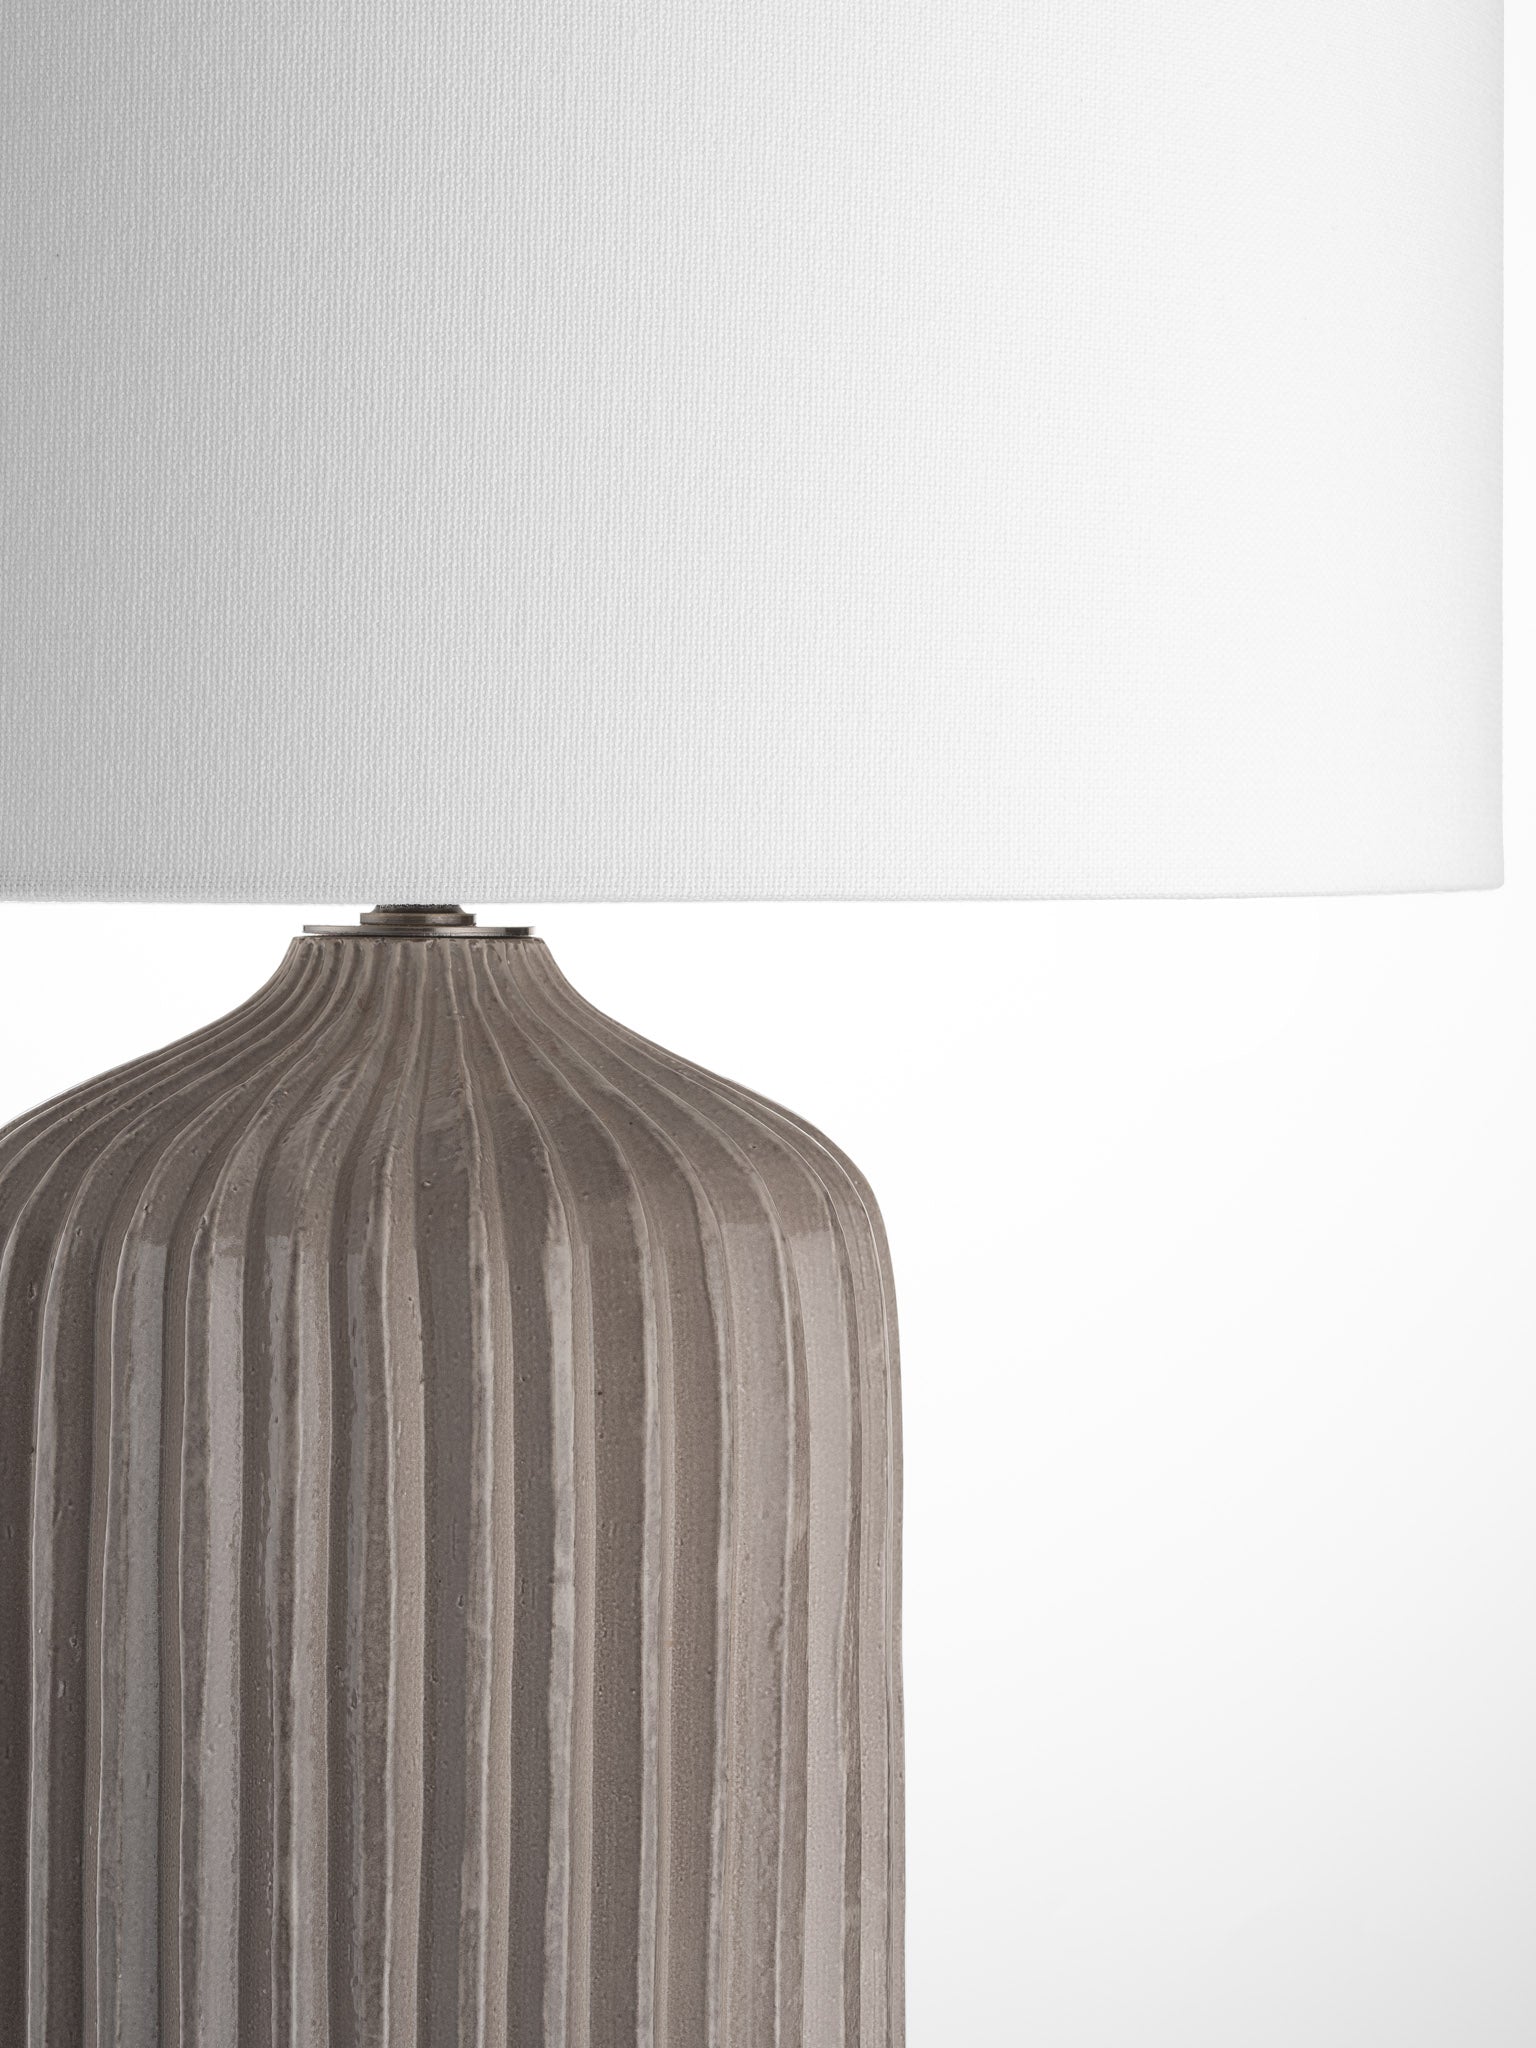 large ceramic brown table lamp with white cotton drum shade